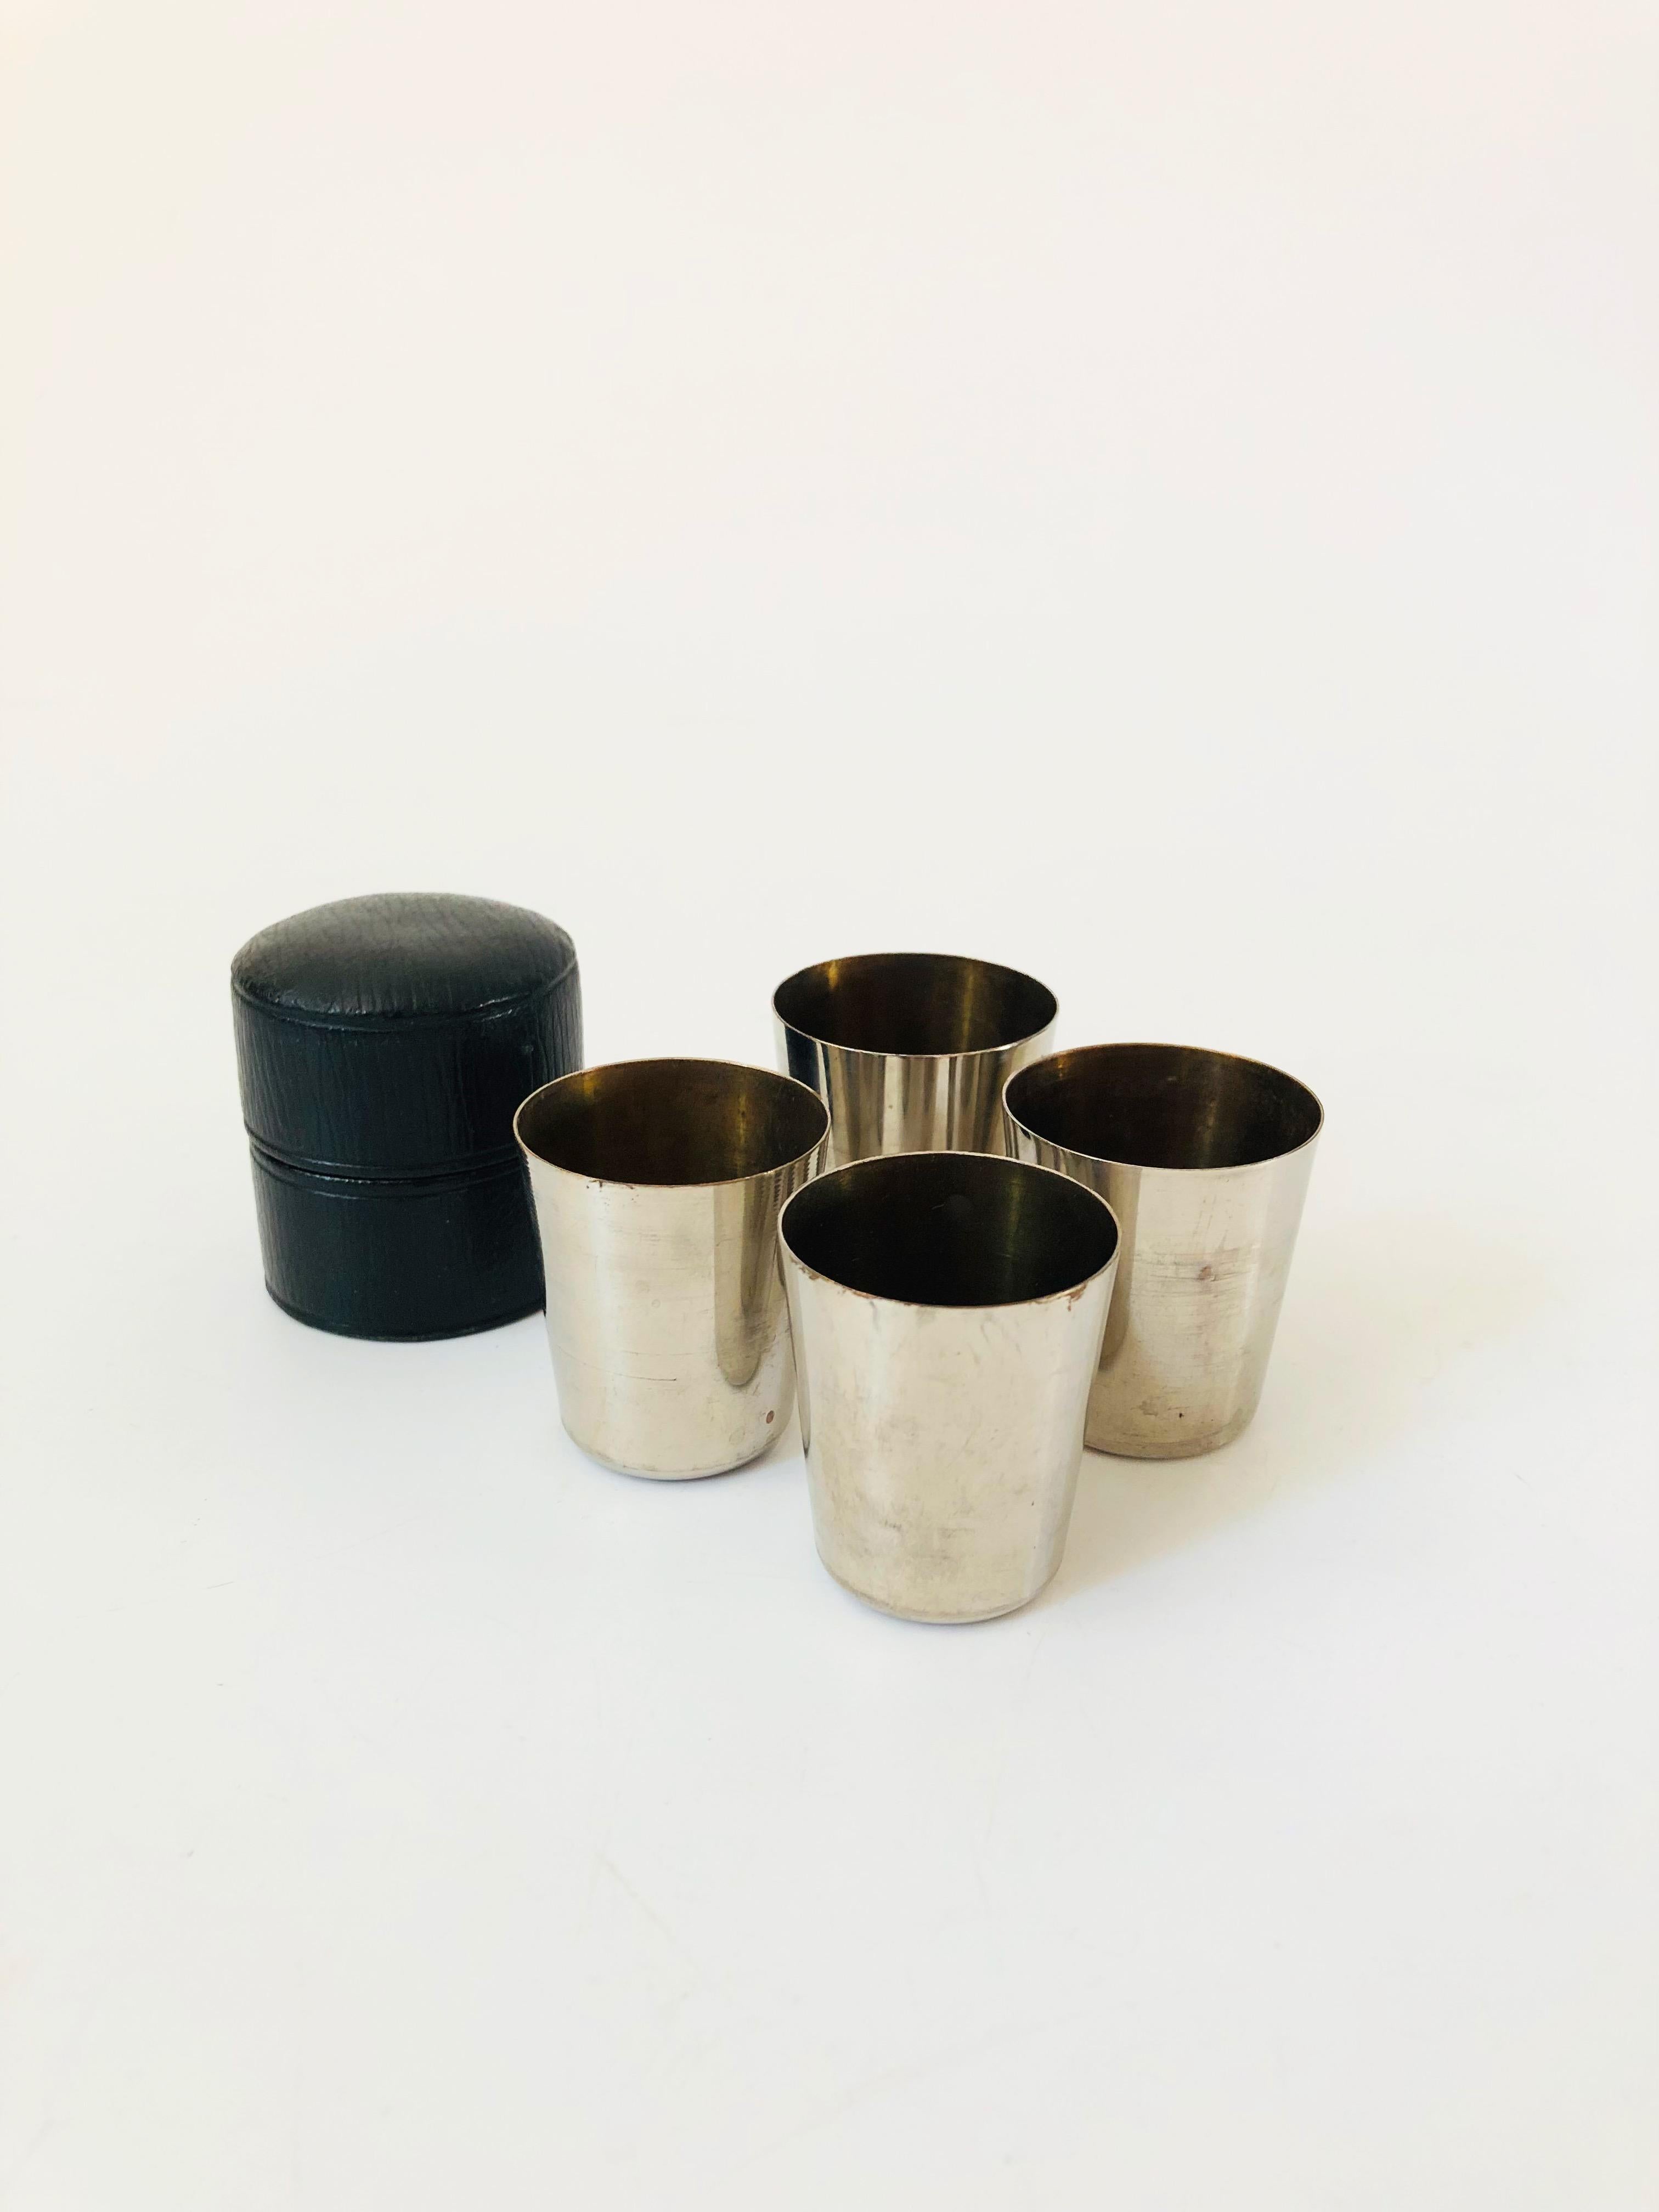 A set of 4 vintage German metal shot glasses in a faux leather case. Each shotglass is made of silver tone metal with a bright gold interior. The stack neatly into each other for storage and within the case. Each cup is marked Germany on the